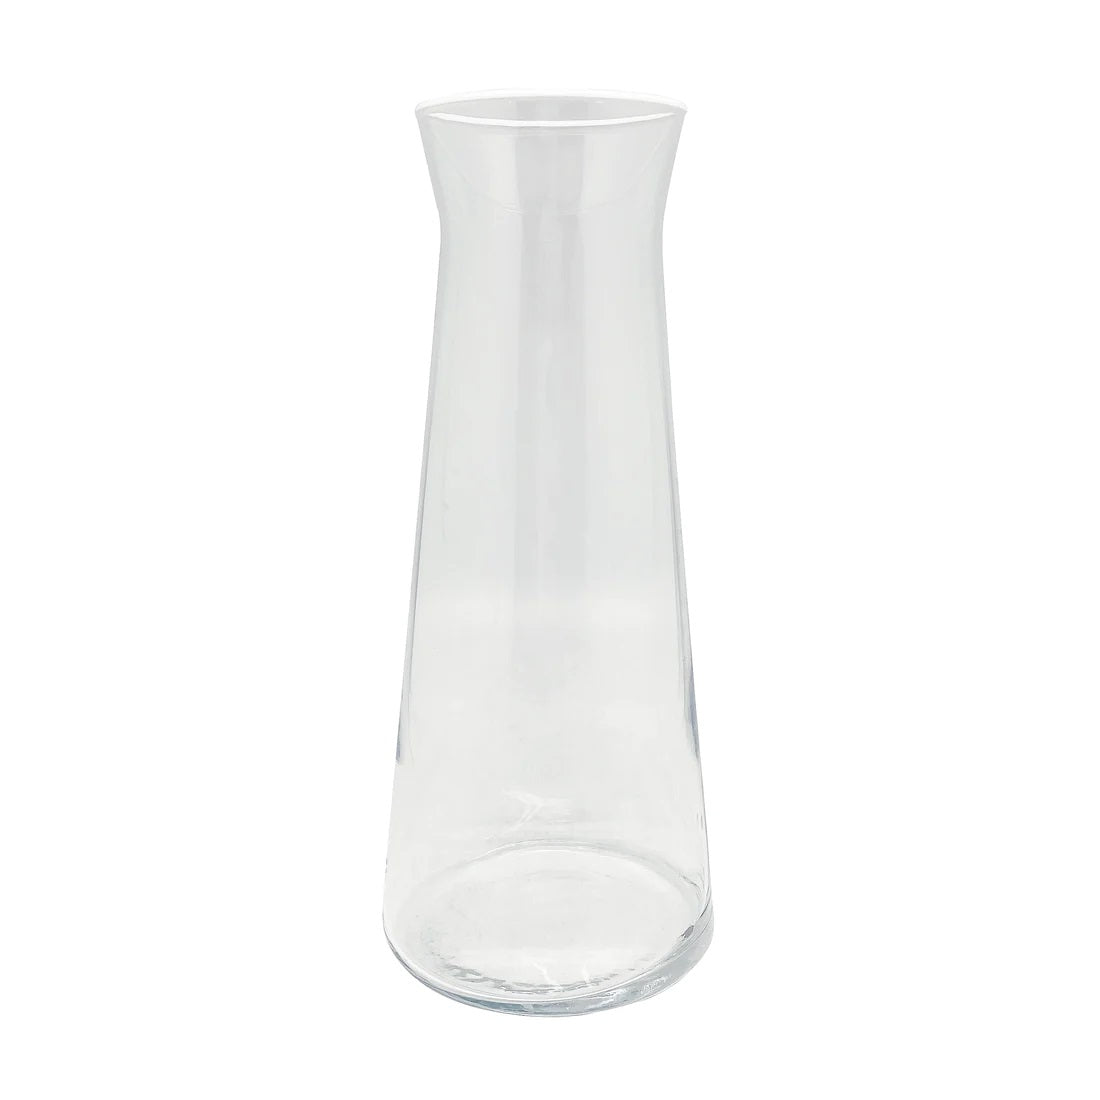 Fine Line Clear with White Rim Decanter - Gaines Jewelers